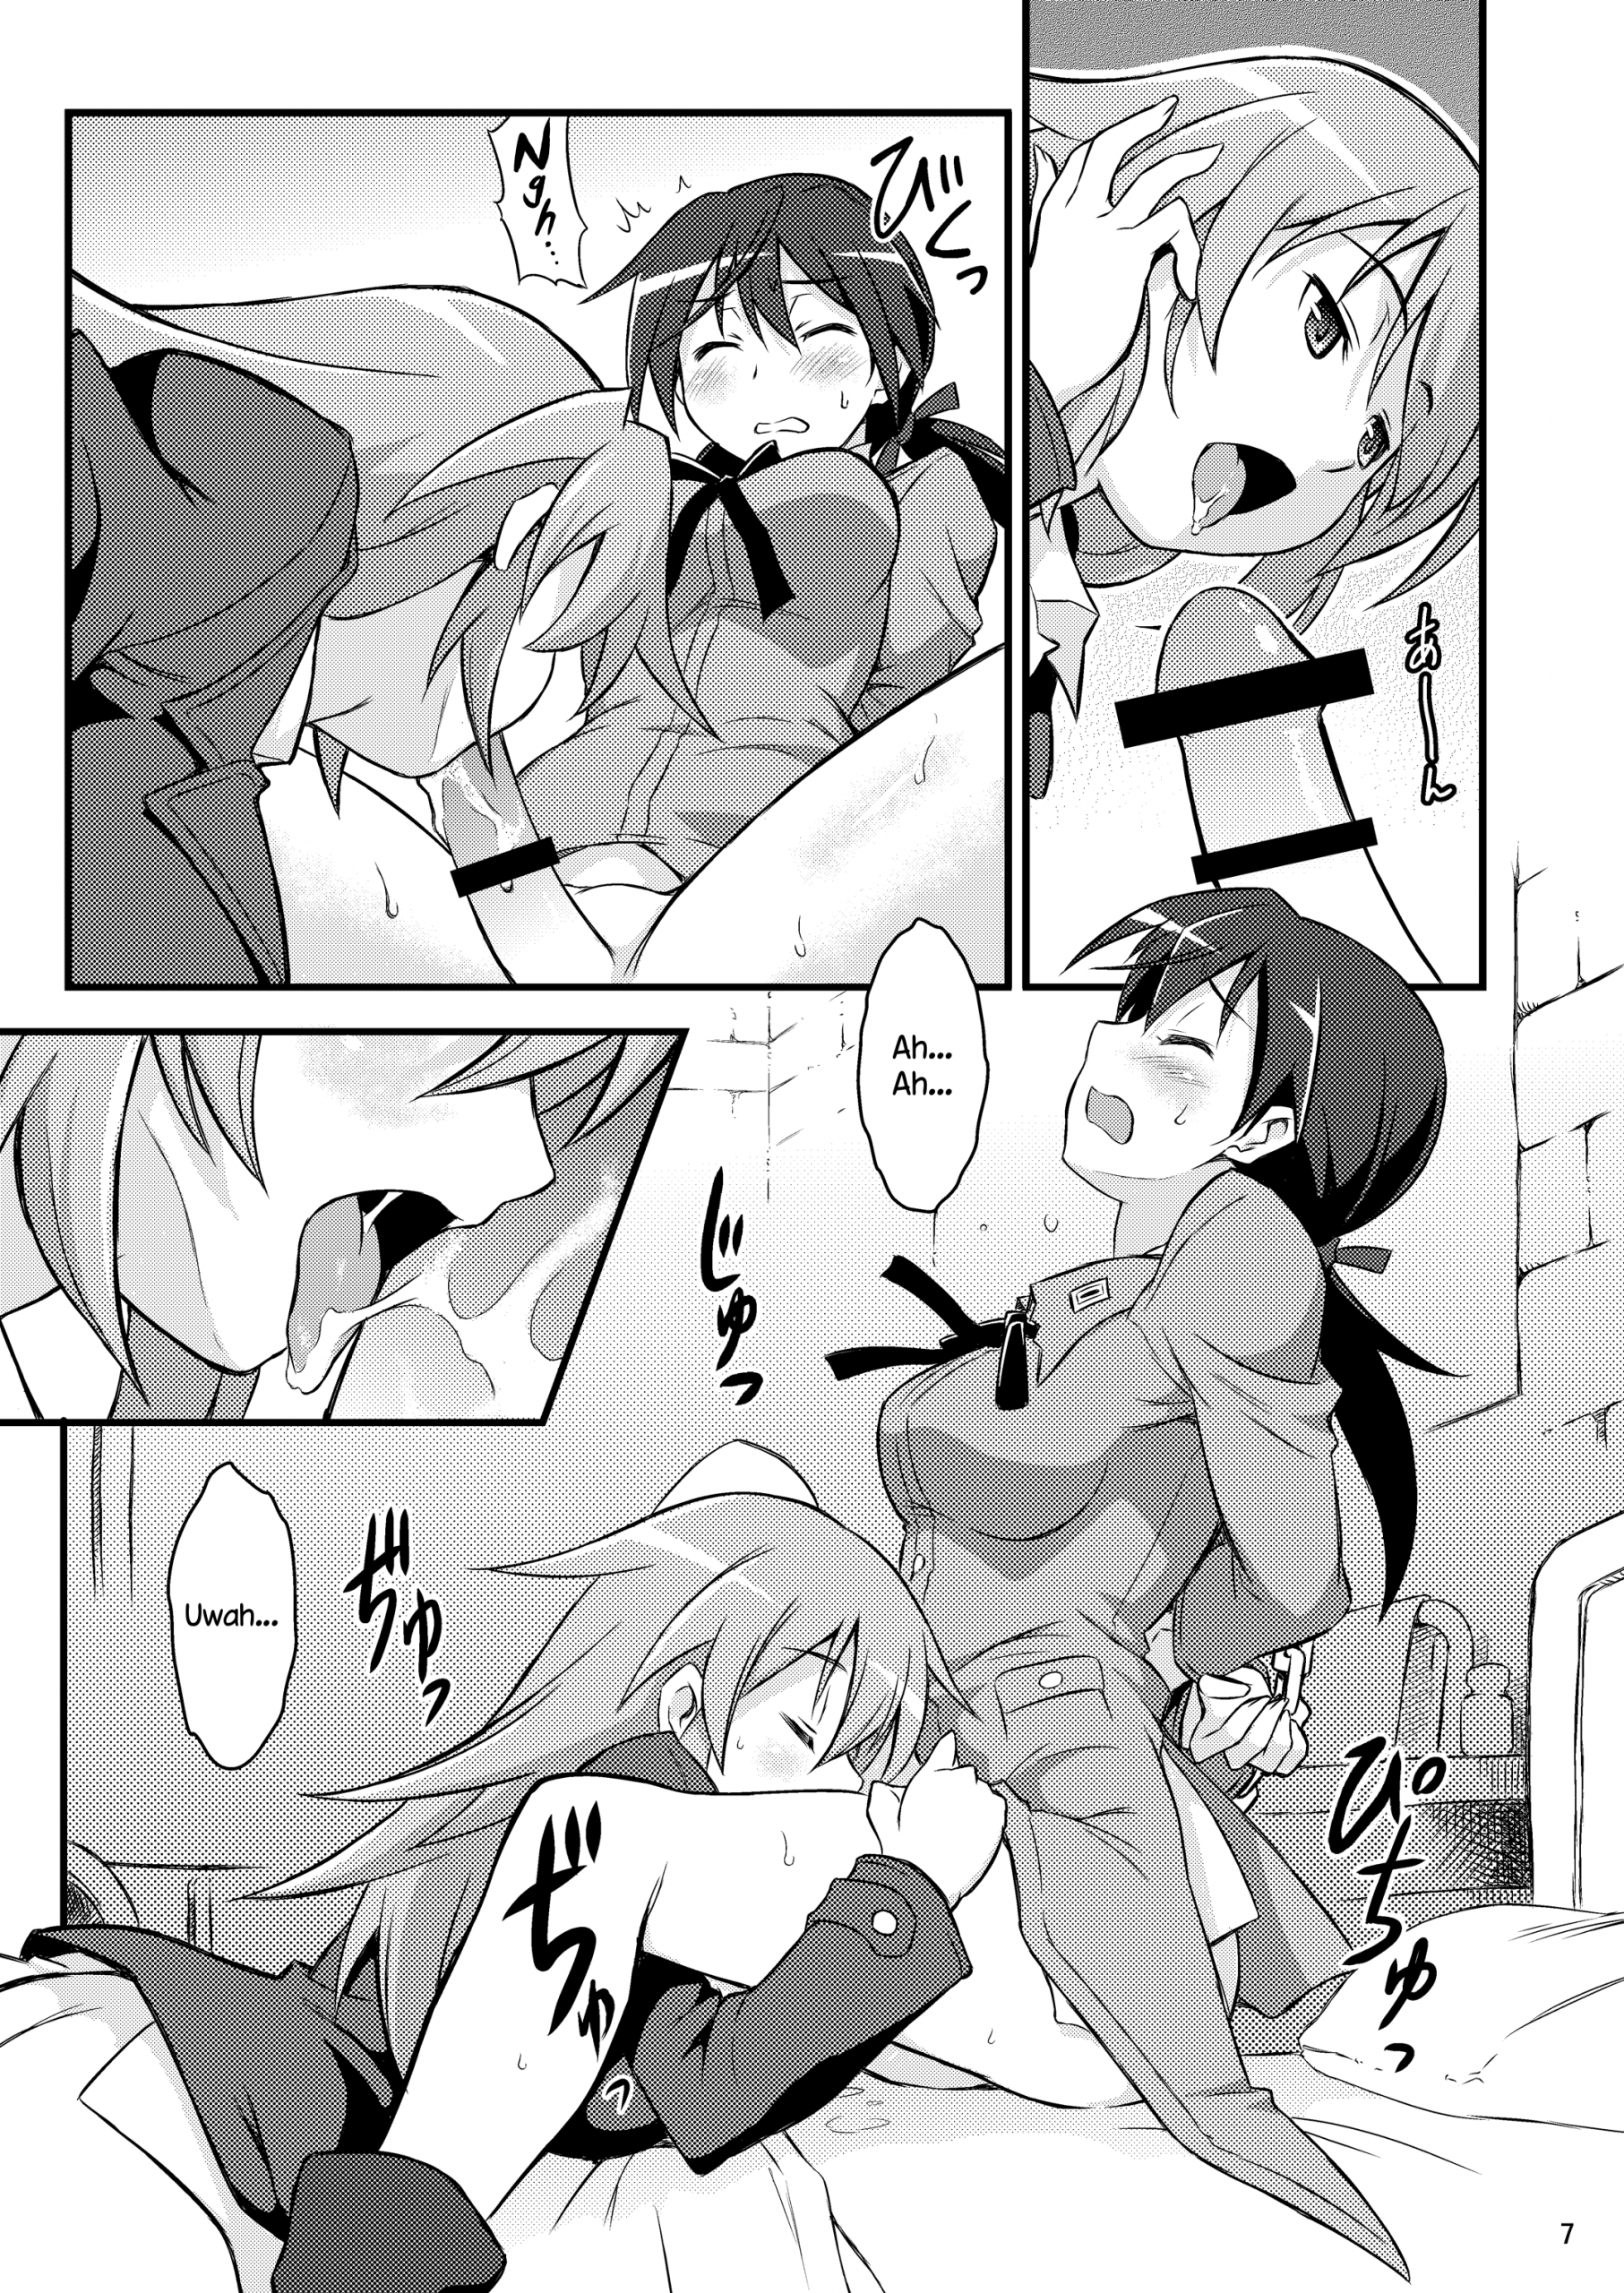 Shir and Gert in Big Trouble hentai manga picture 6